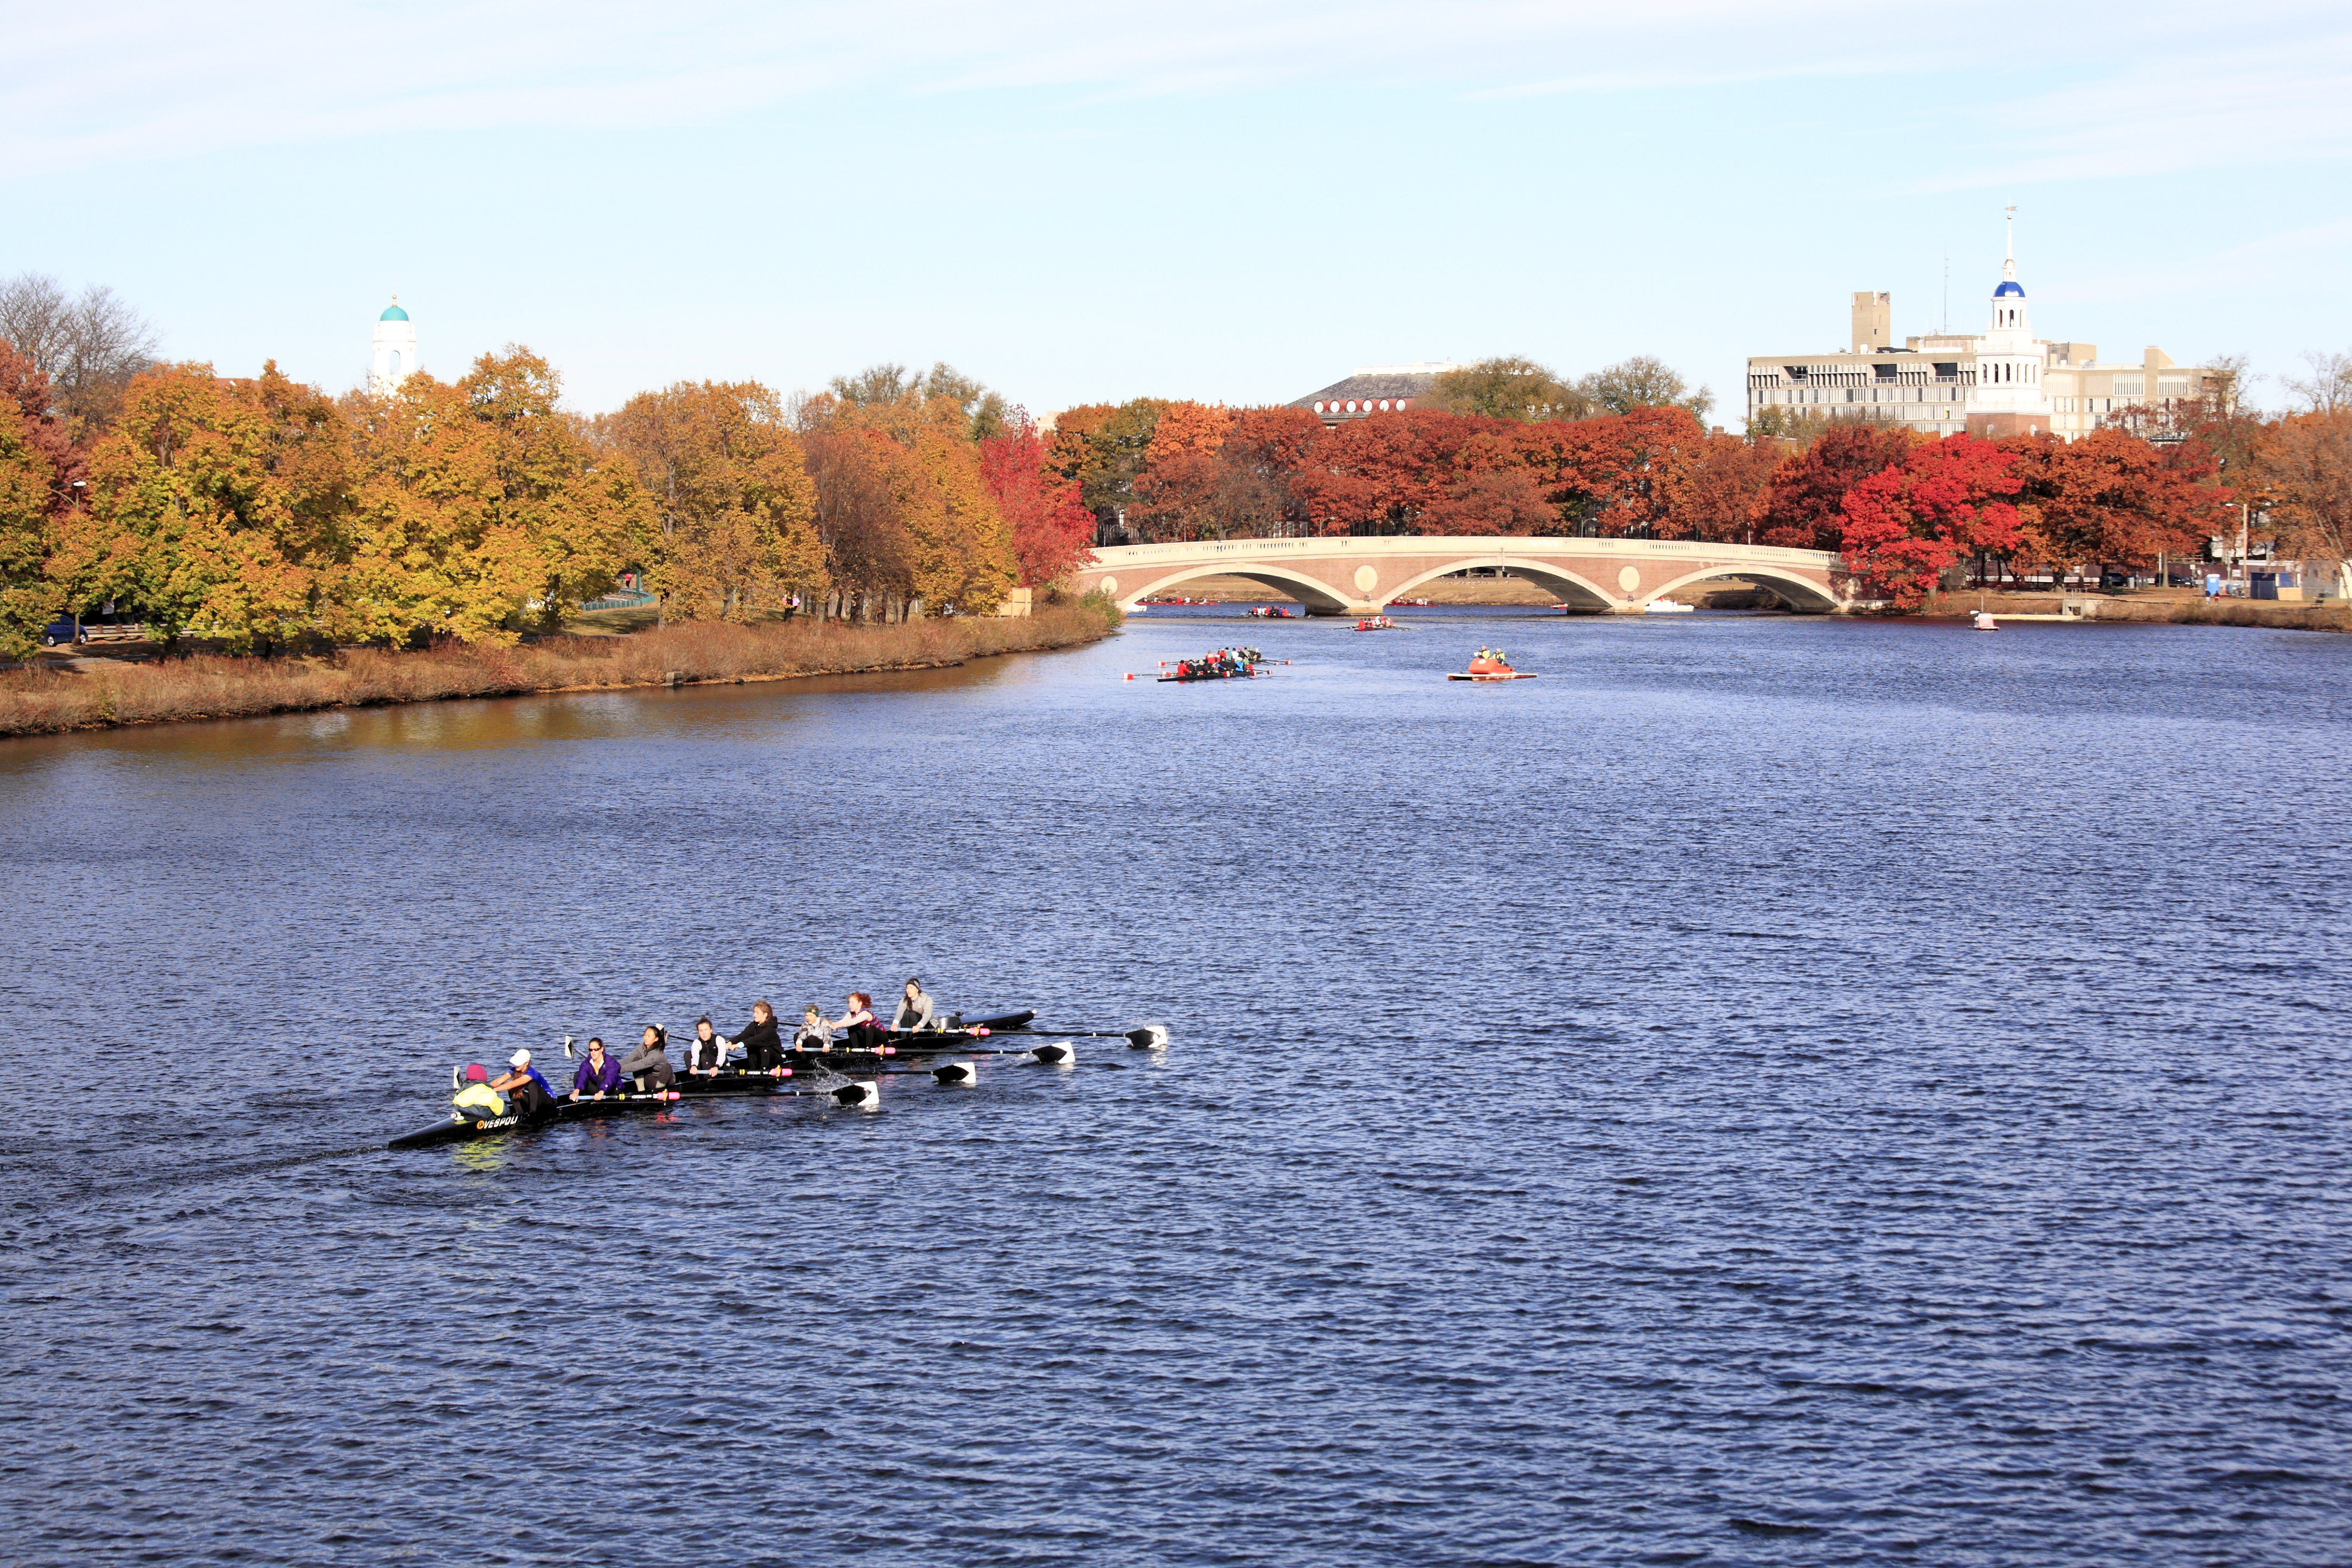 Rowing on the Charles River